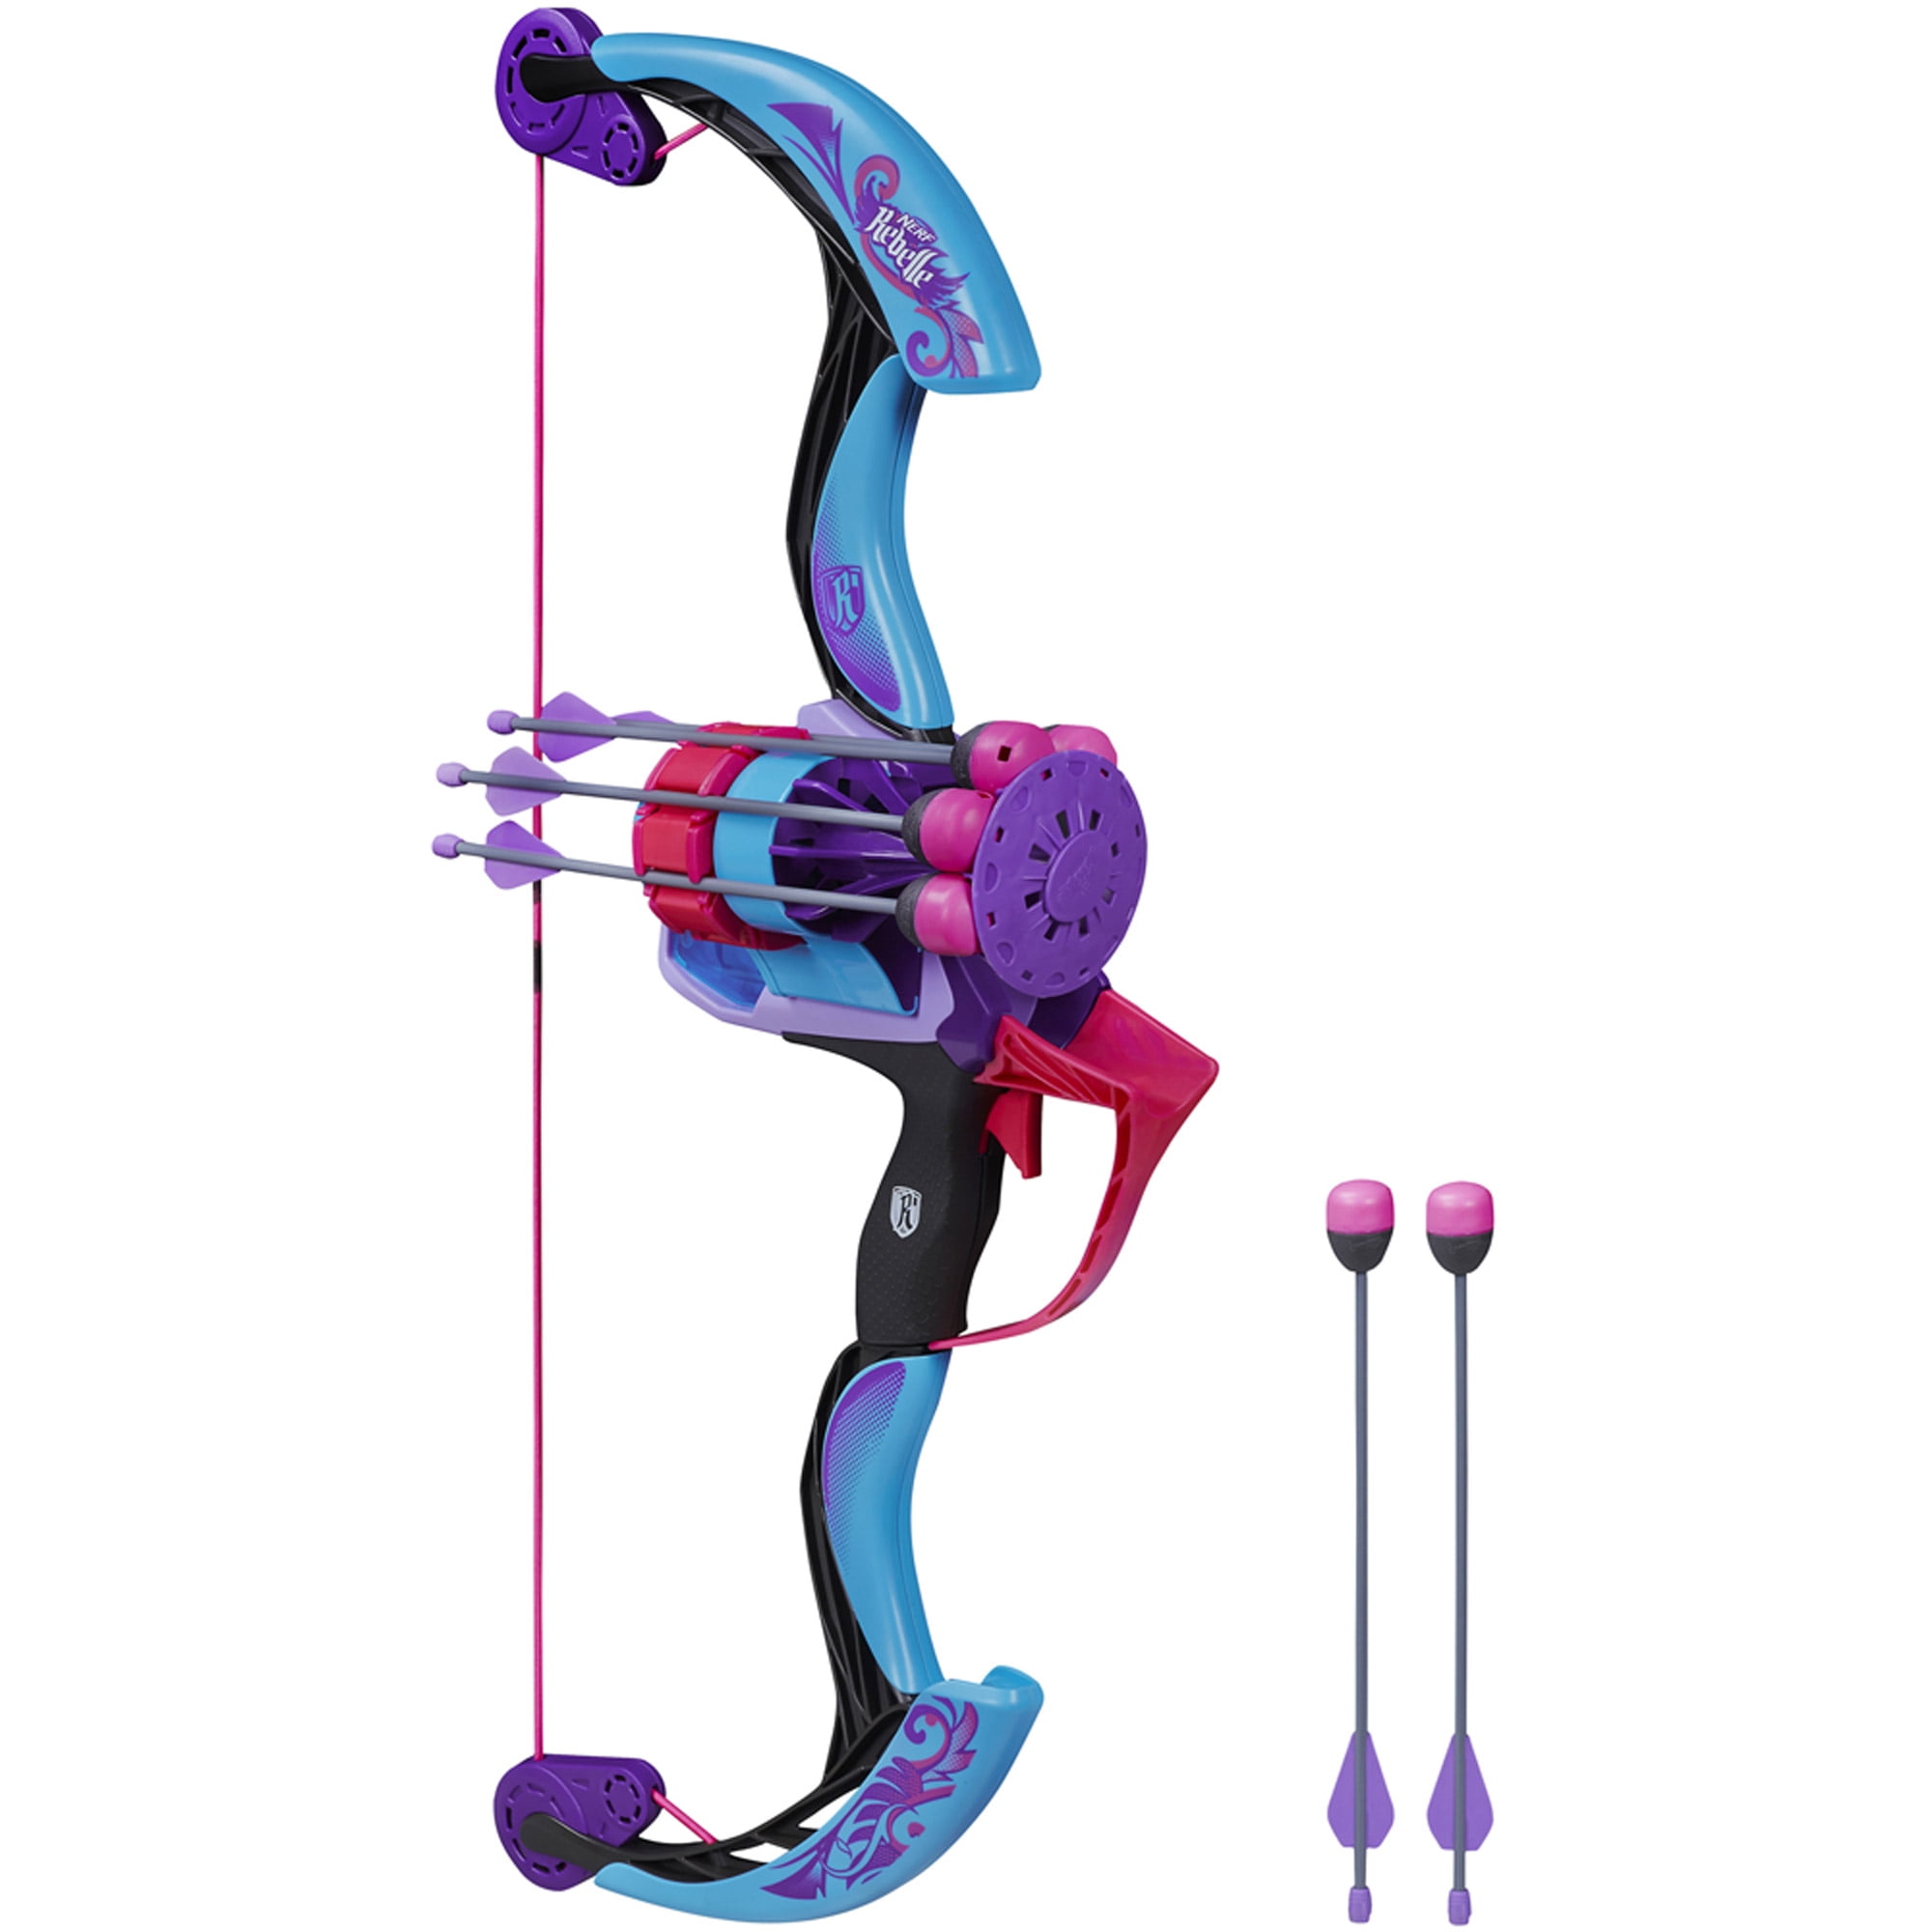 Nerf Rebelle Secrets and Spies 4Victory Blaster